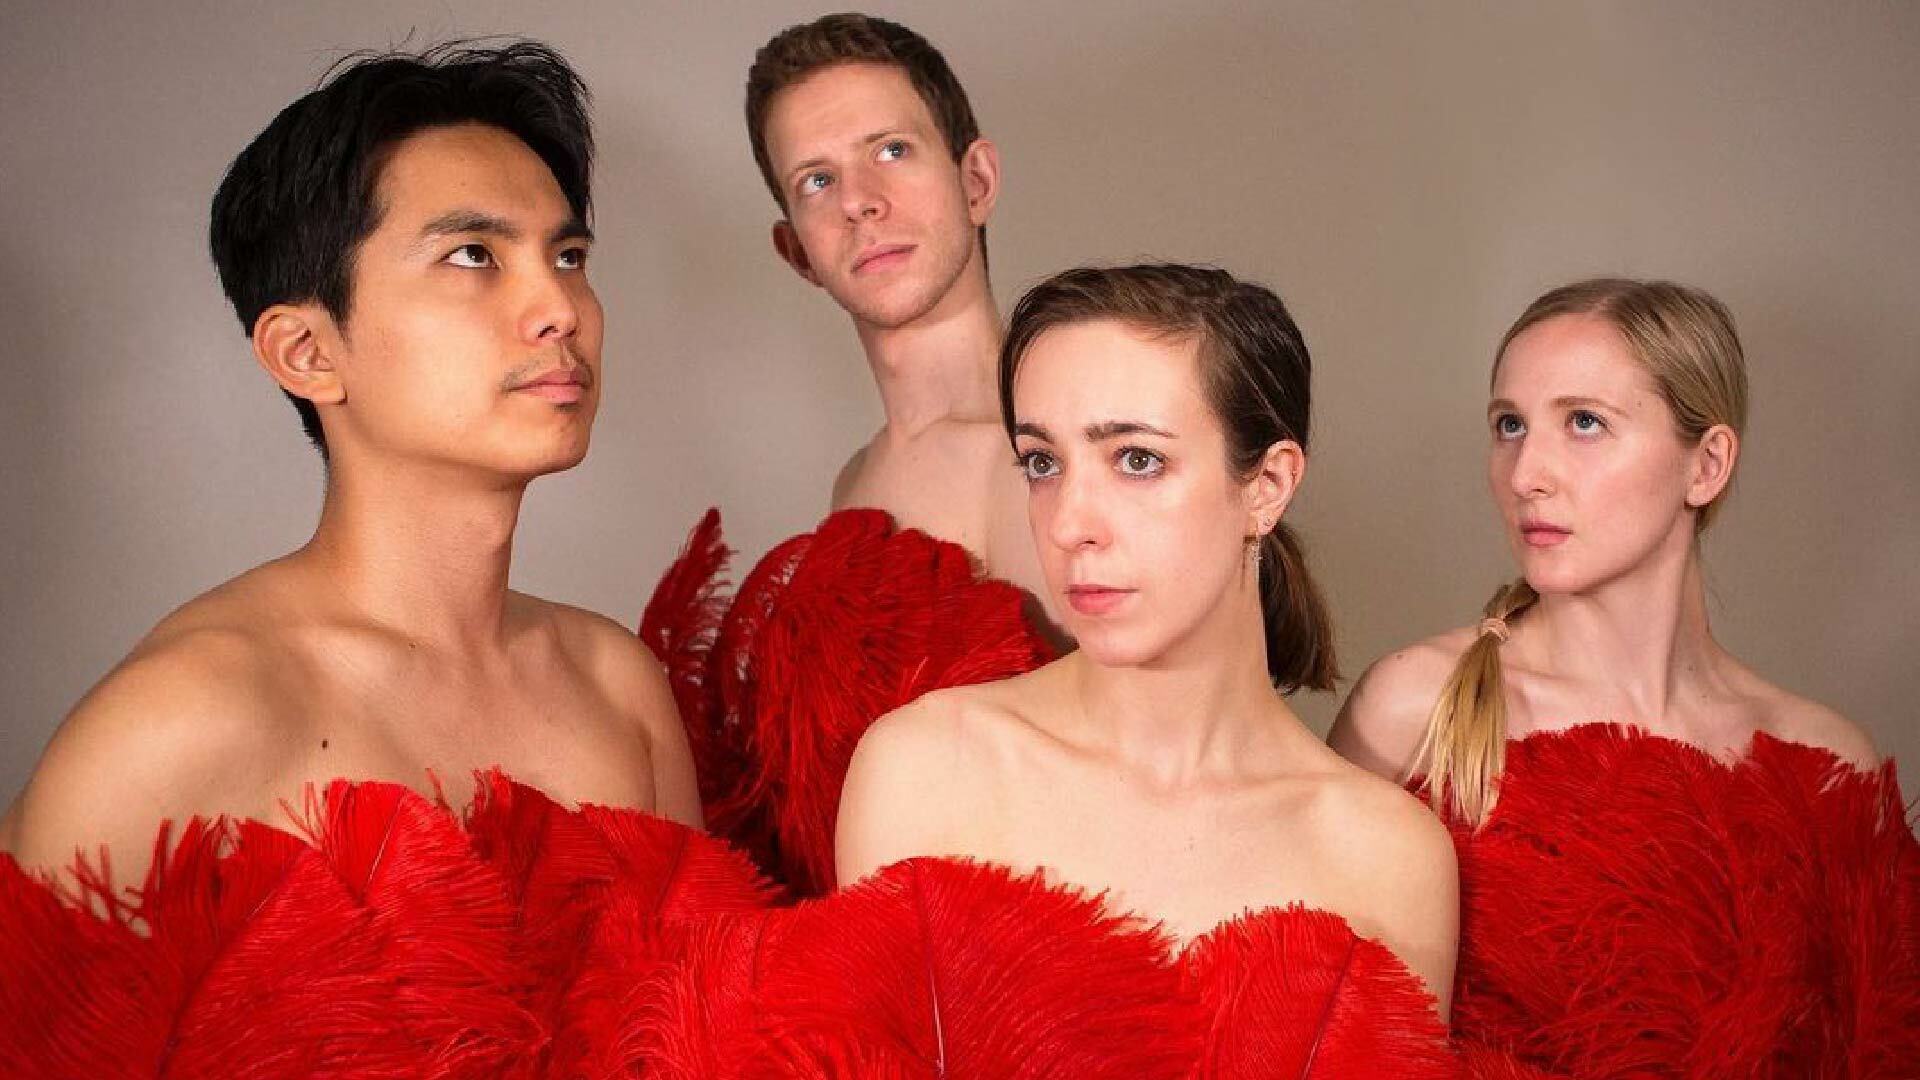 Four people stand together seemingly naked covered by fluffy red feathers from the top of the chest down